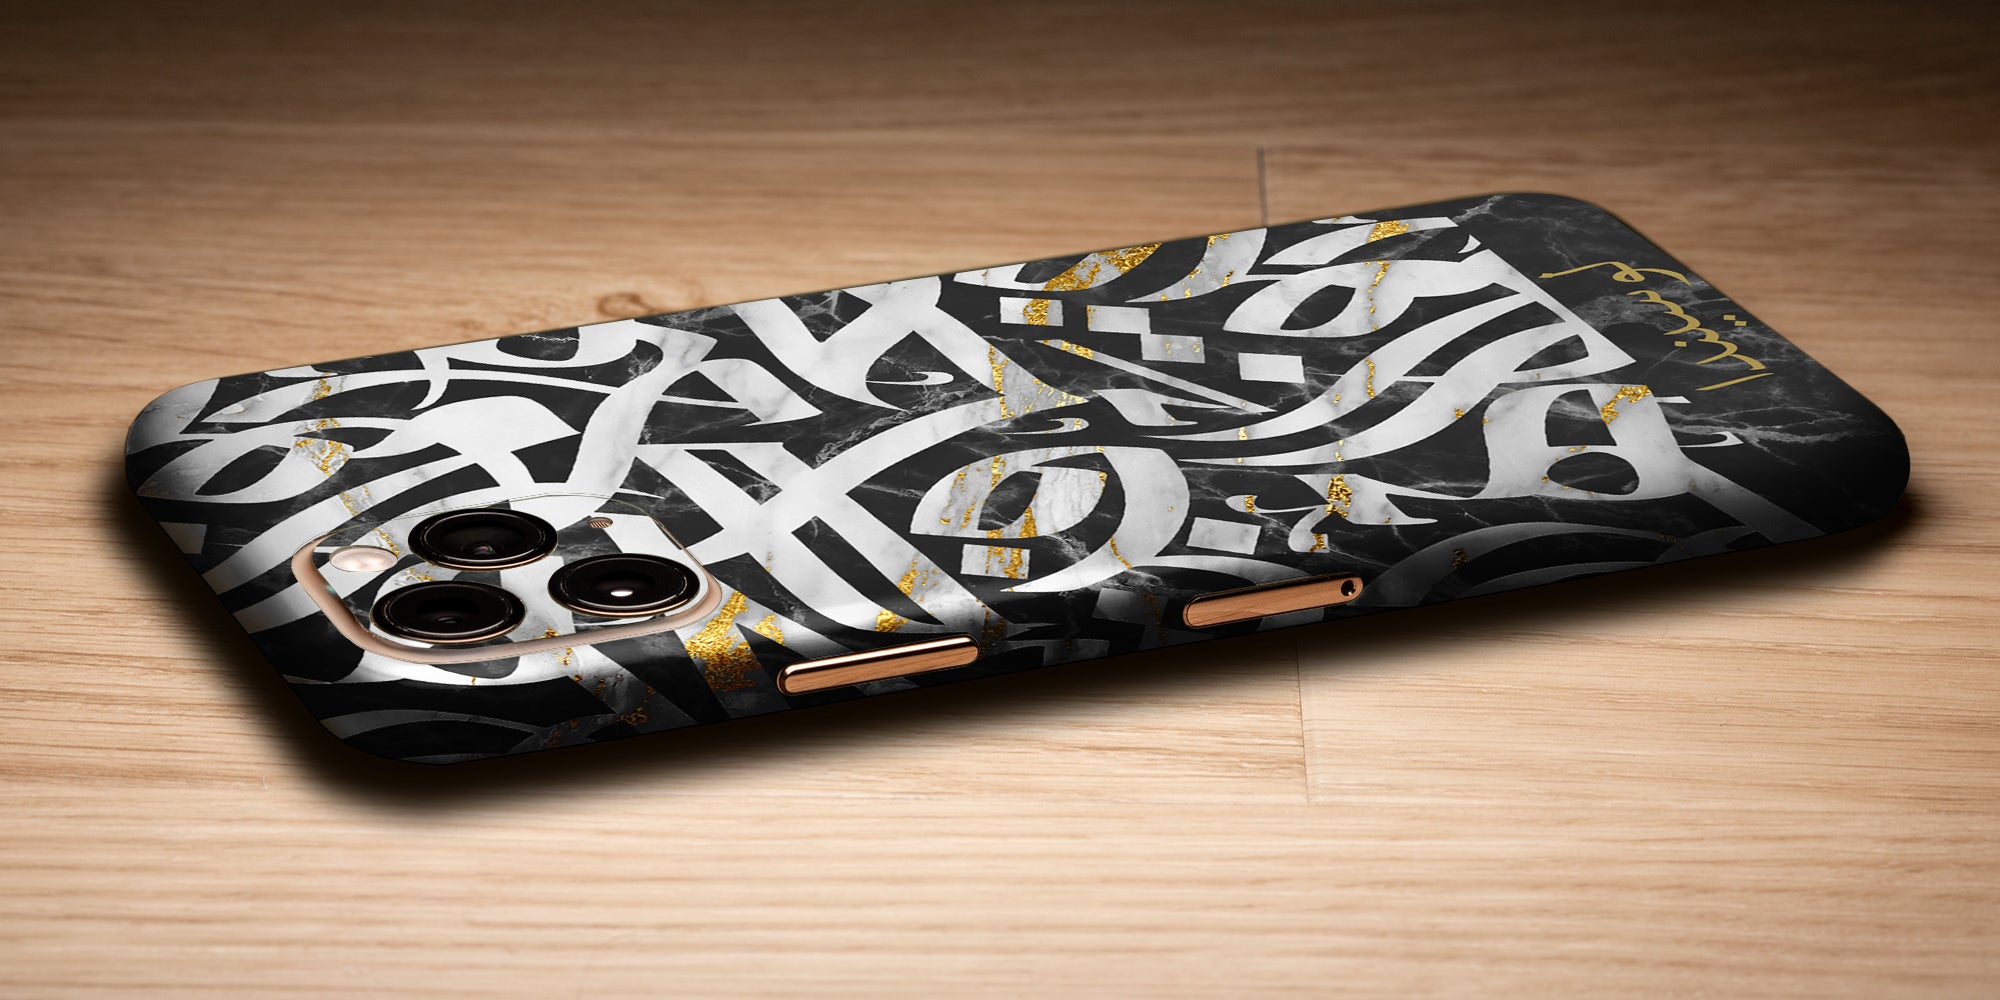 Arabic Calligraphy by Asad Decal Skin With Personalised Name Phone Wrap - Black Marble